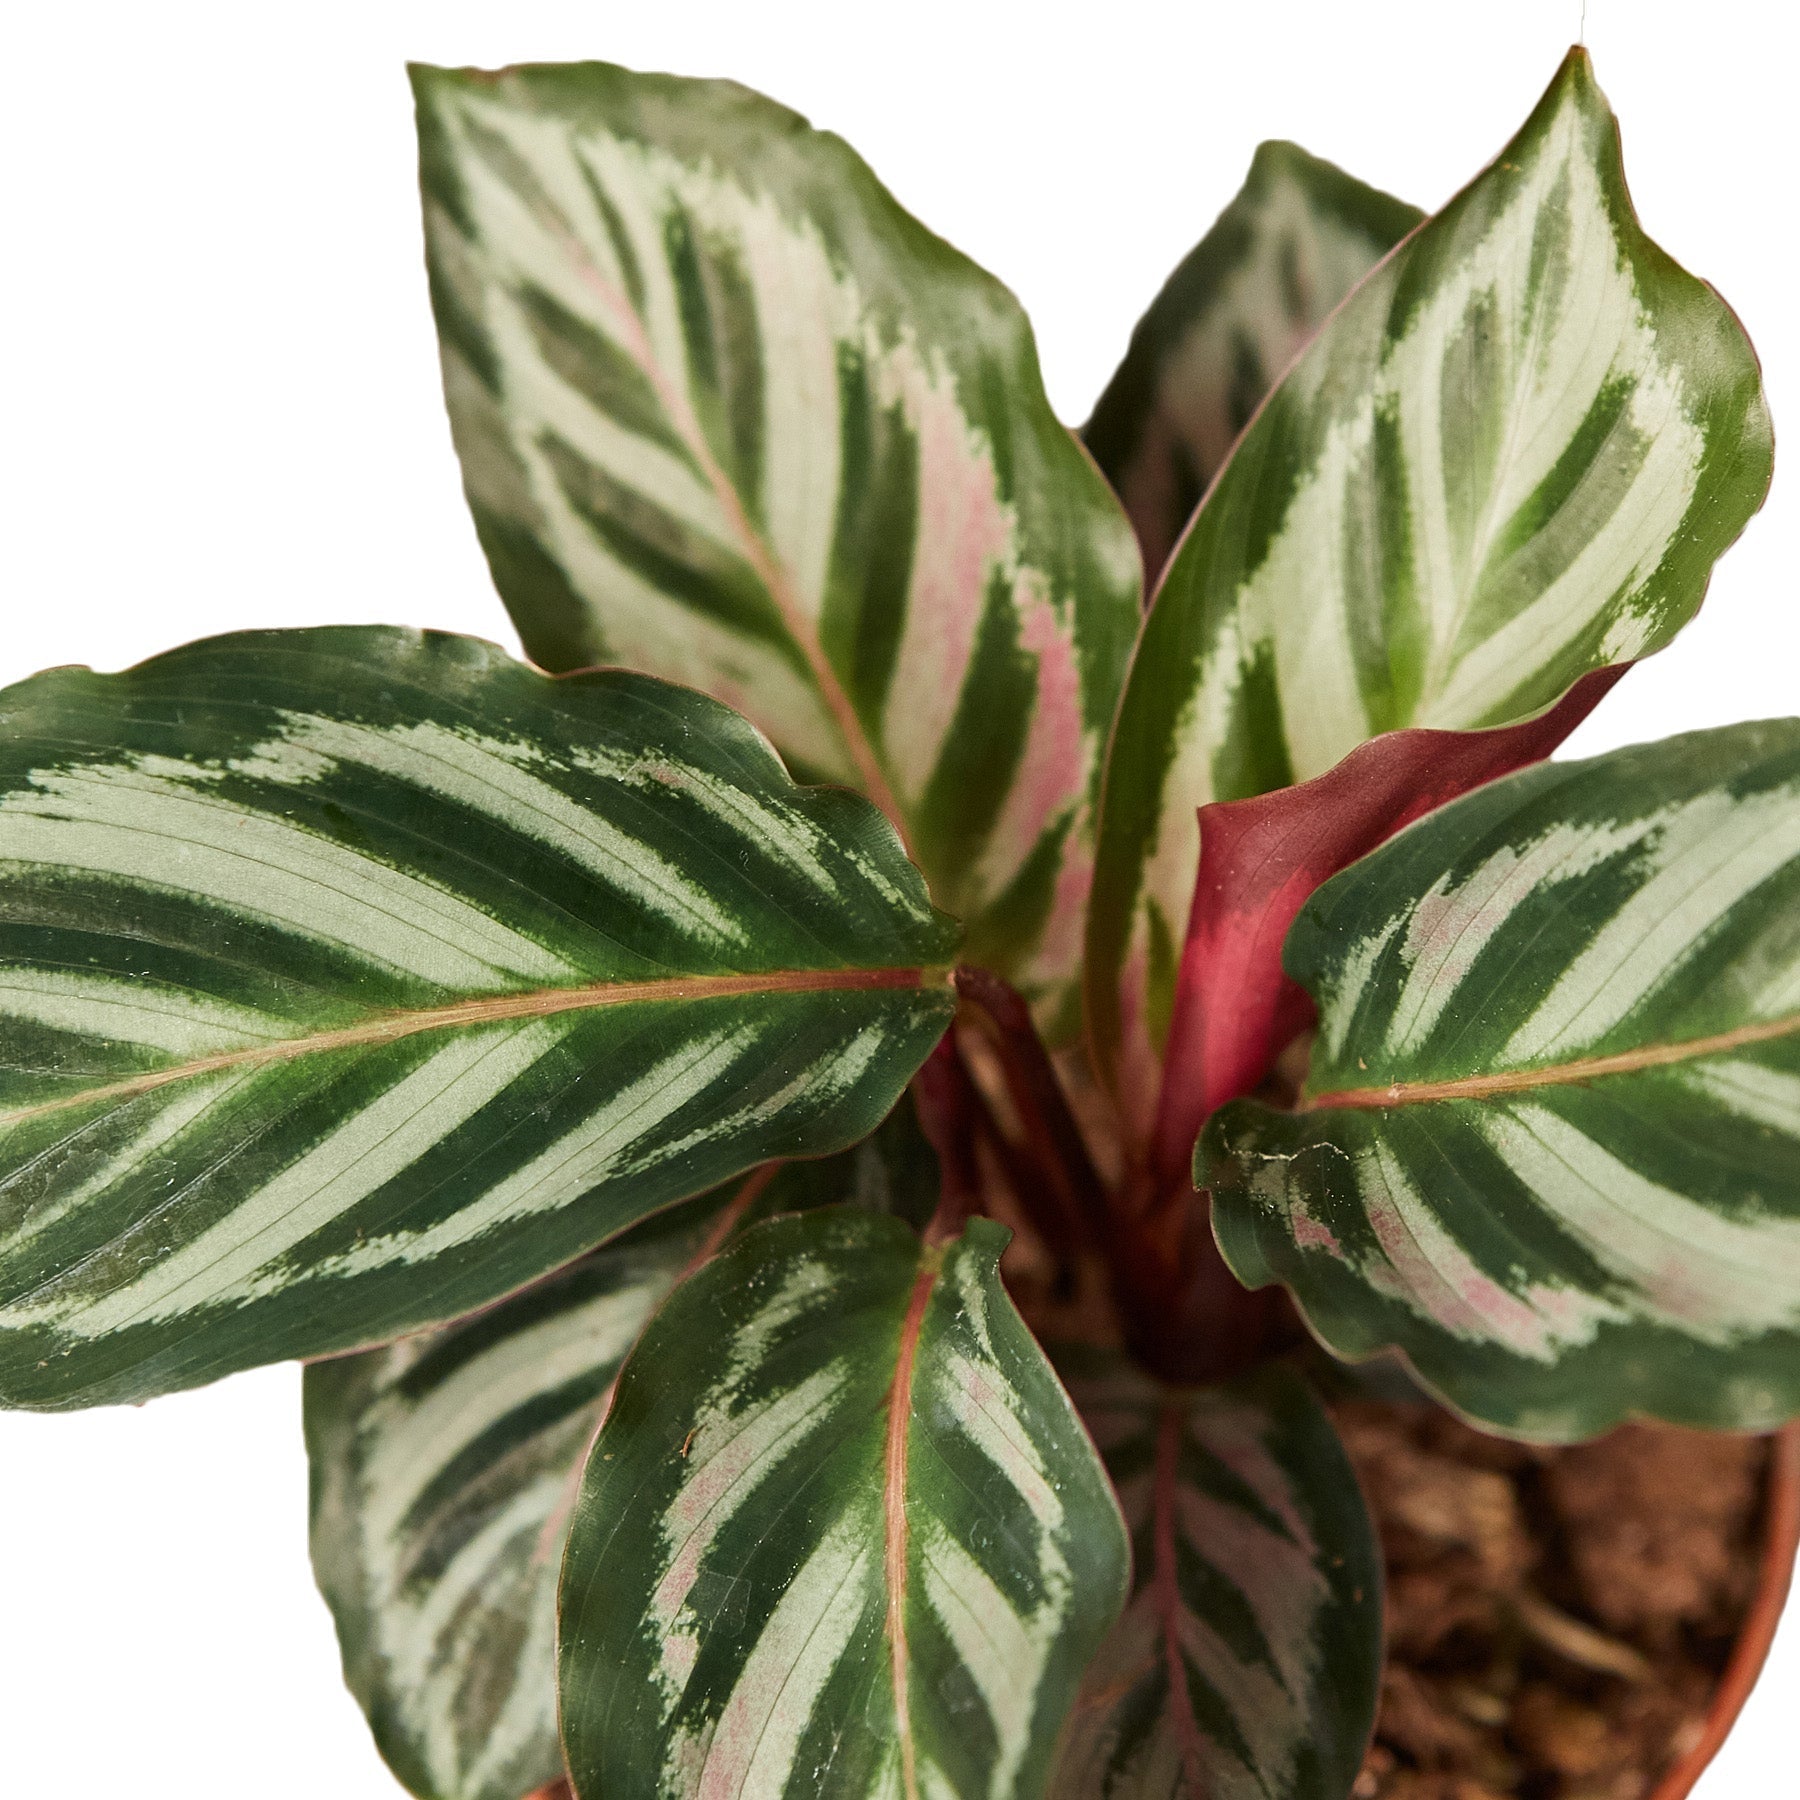 A vibrant plant with red and white stripes in a stylish pot.